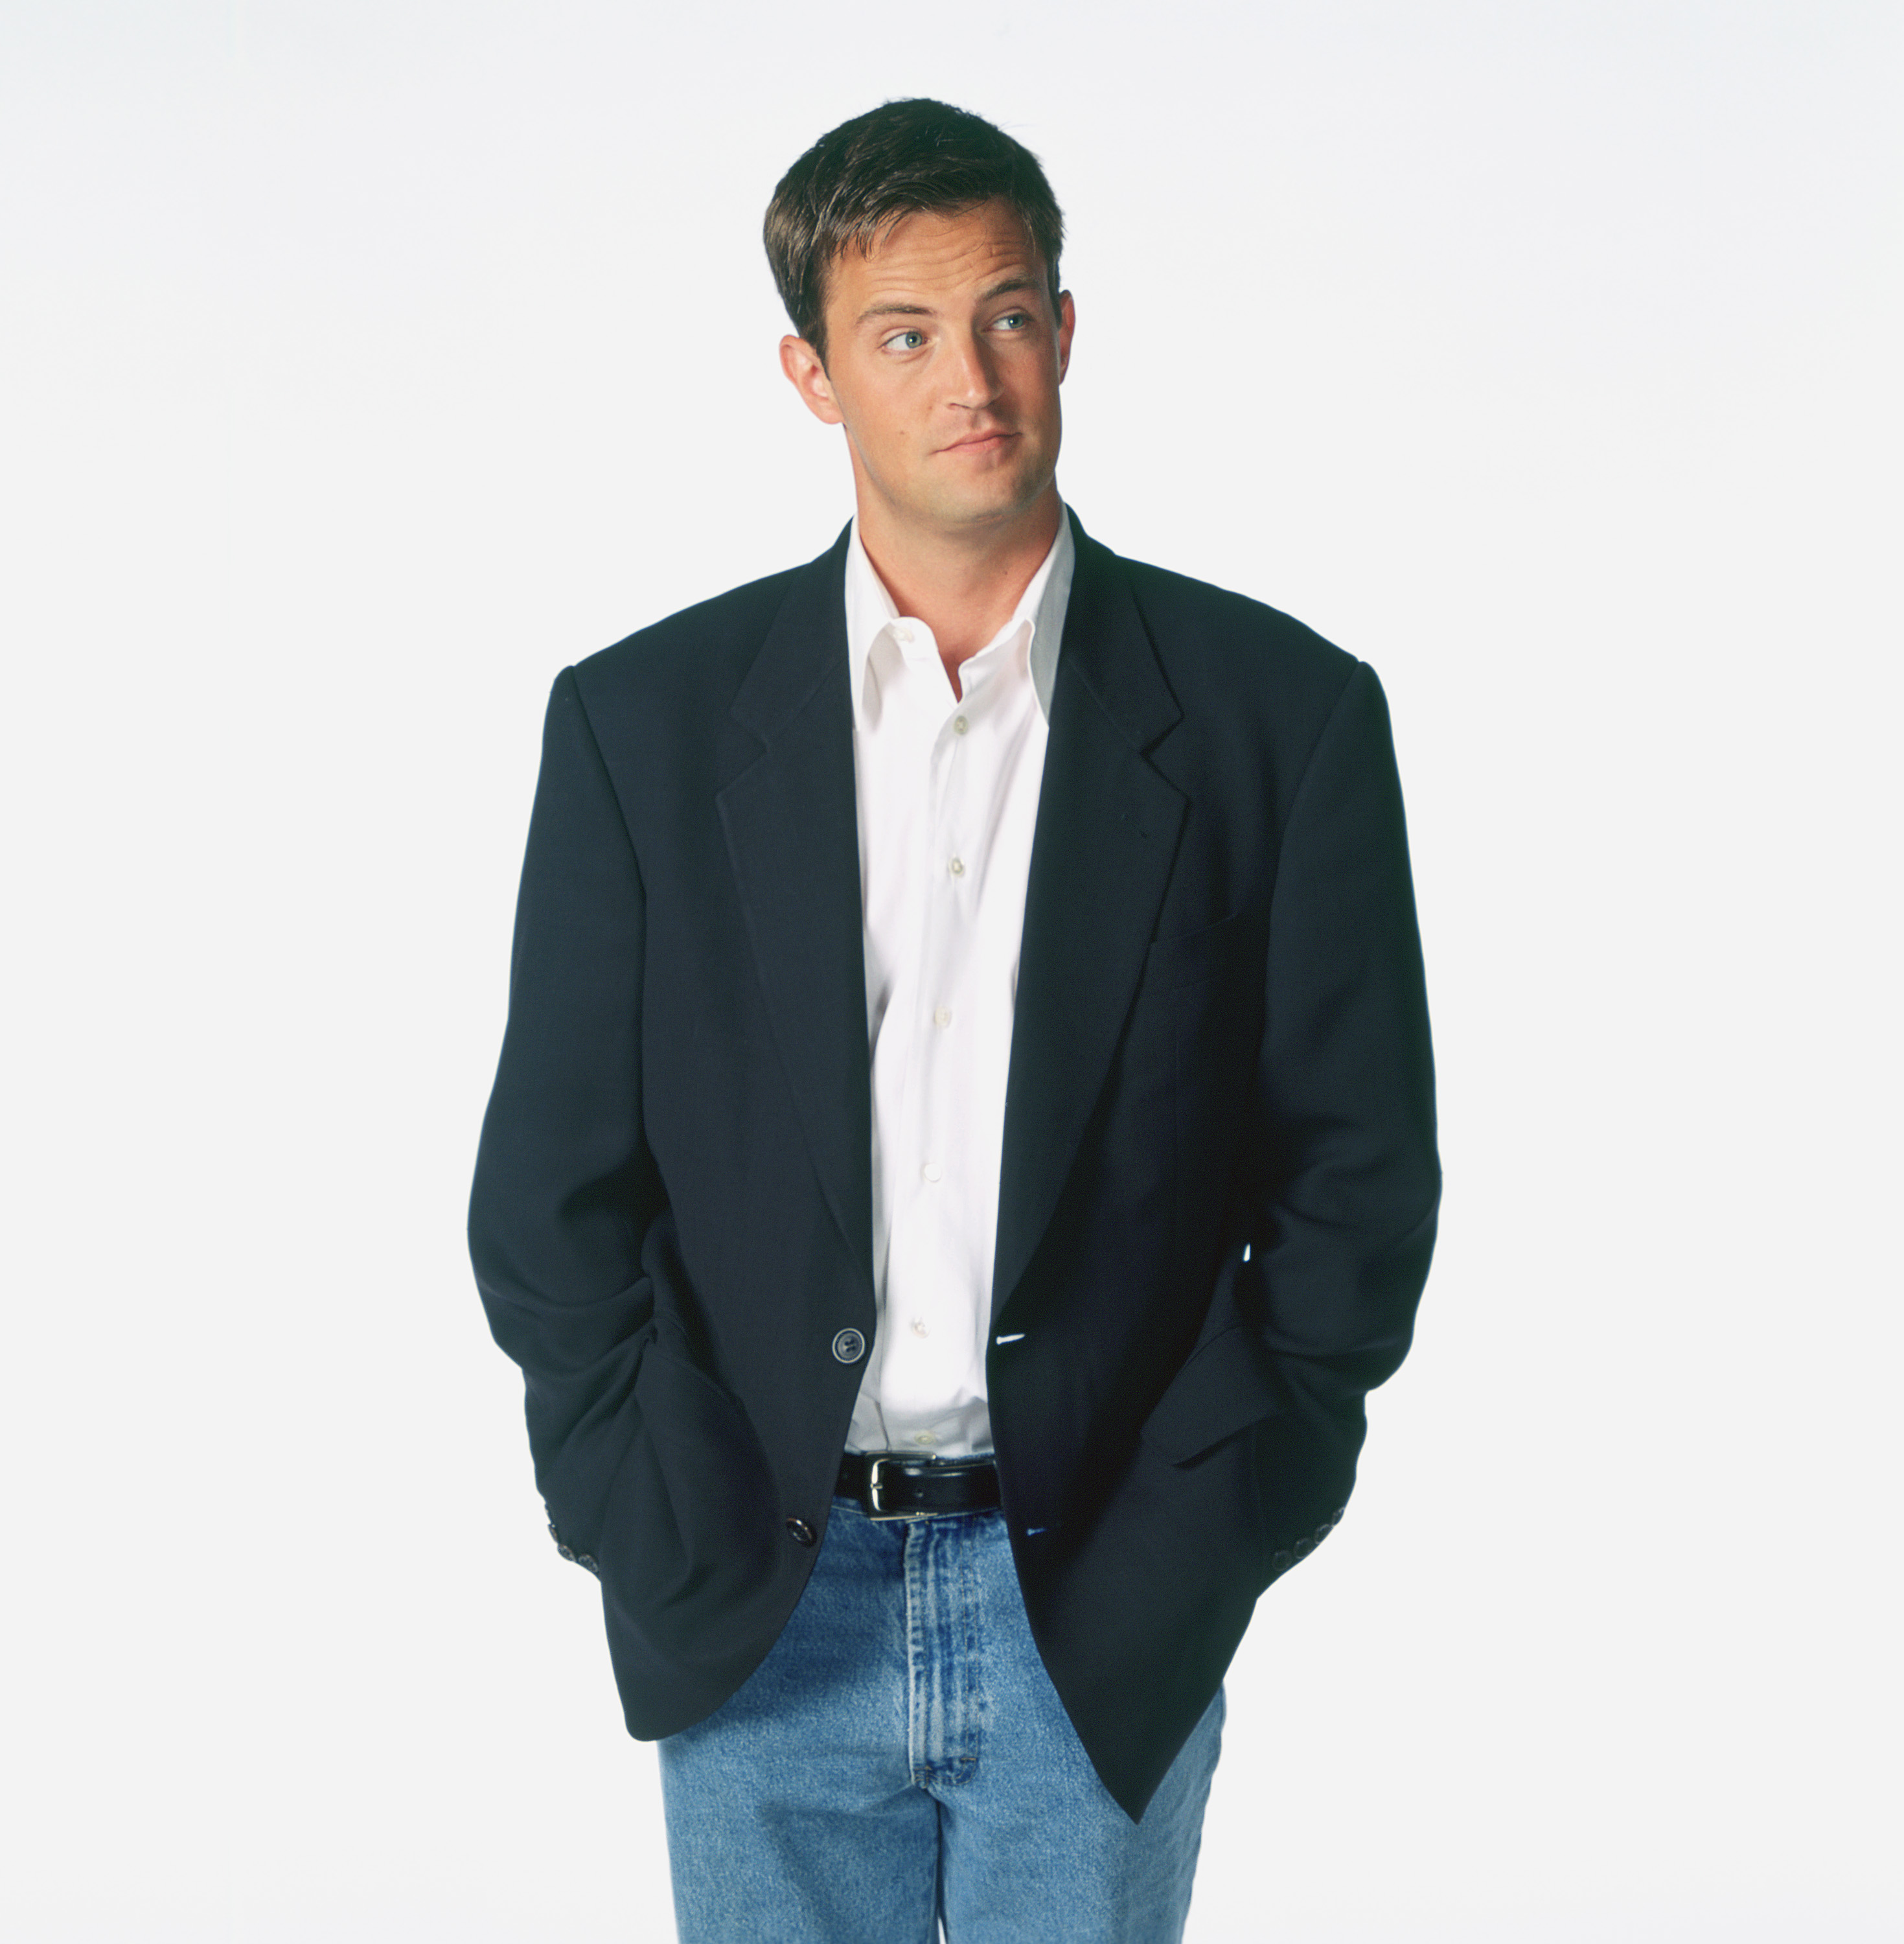 Matthew Perry as Chandler Bing on the set of "Friends" on May 29, 2009 | Source: Getty Images